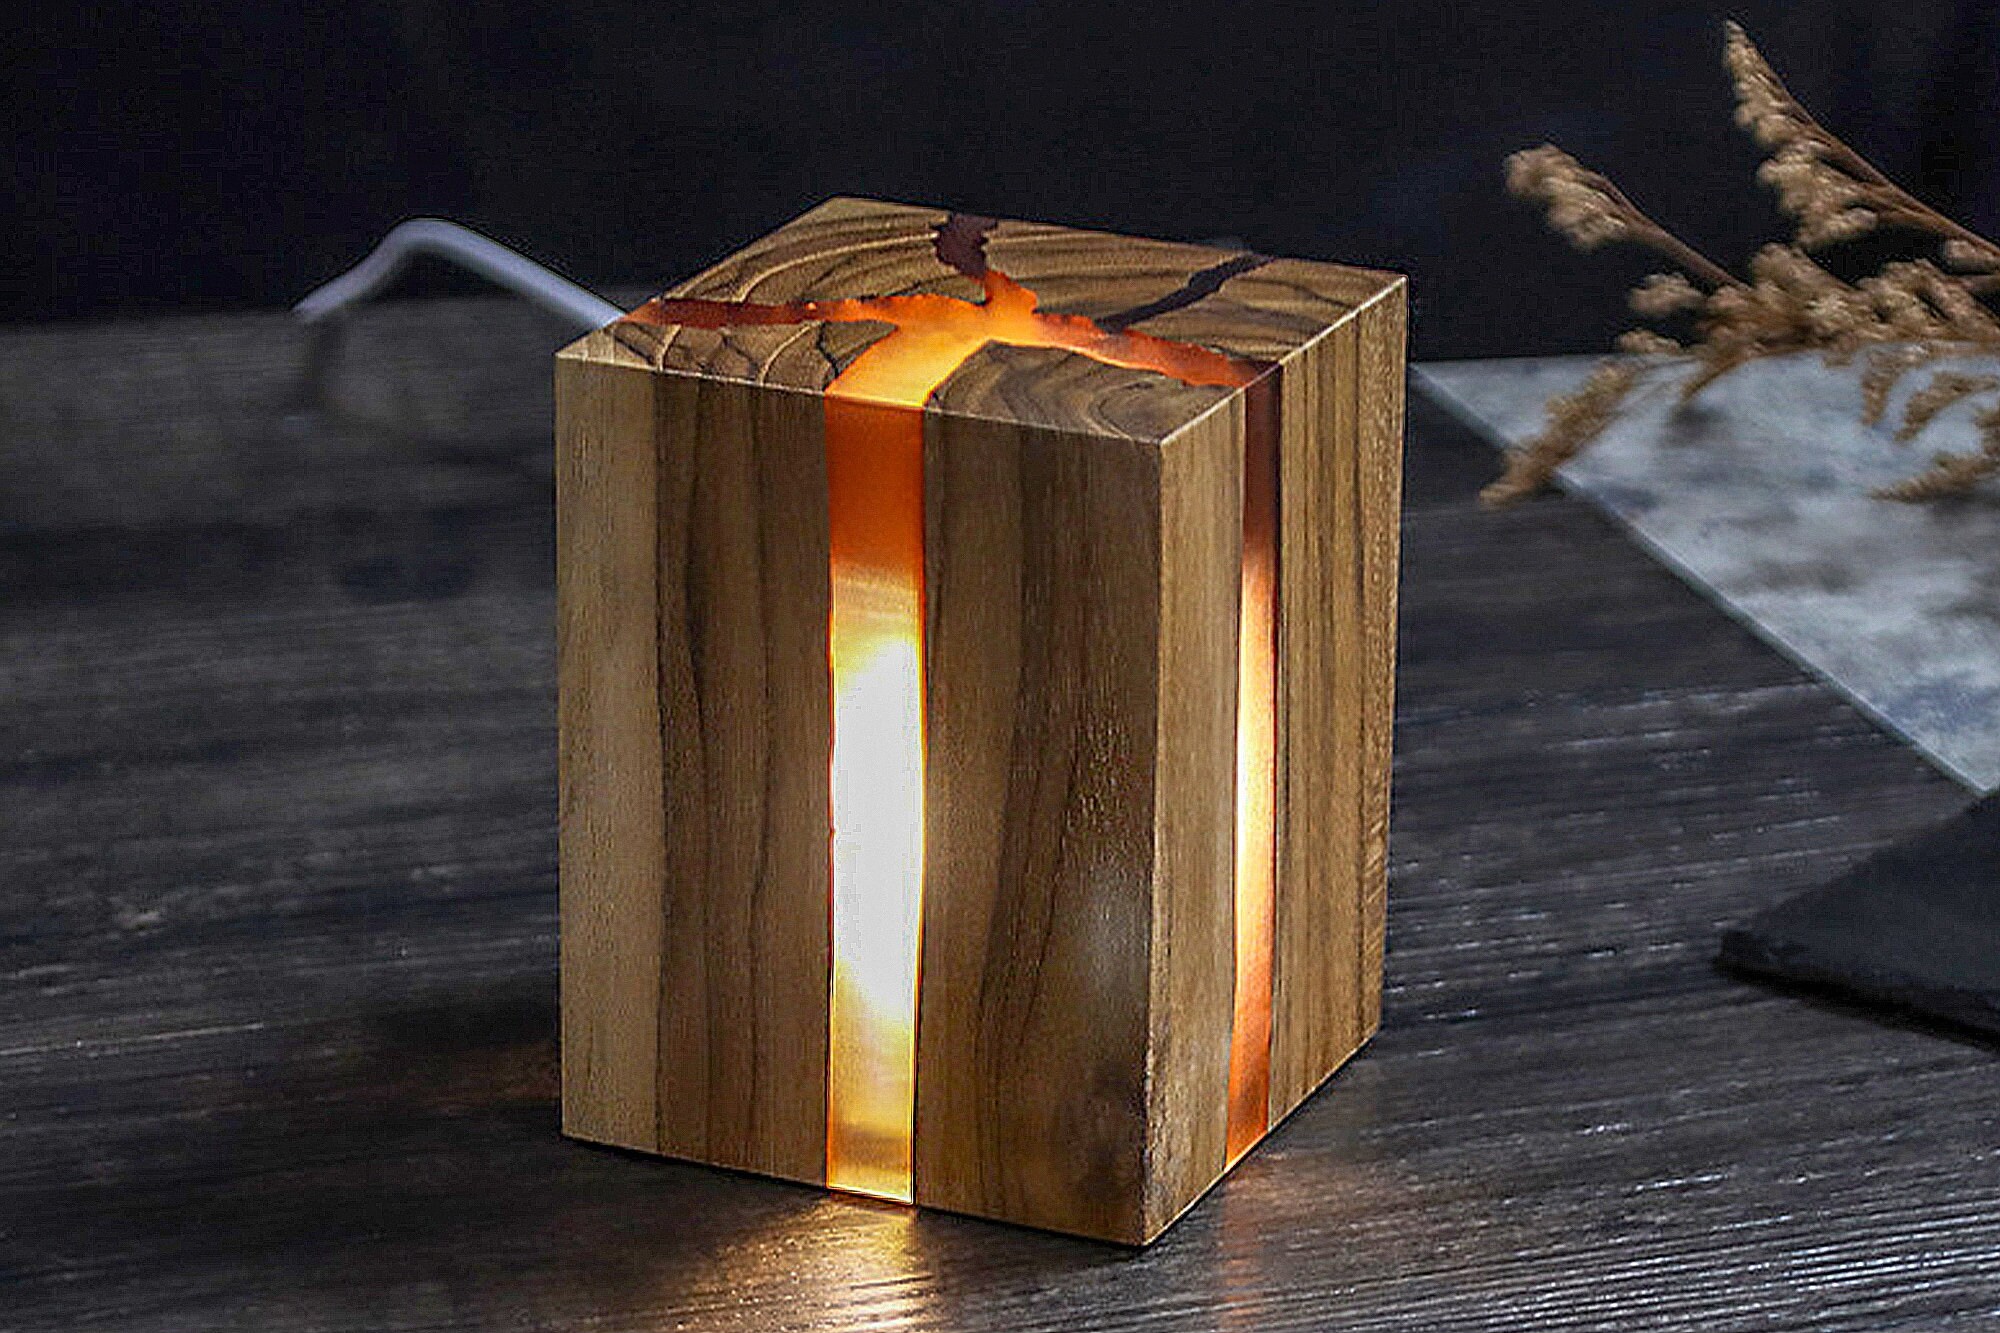 Handcrafted USB Wooden Lamp Base With Universal Slot Design for